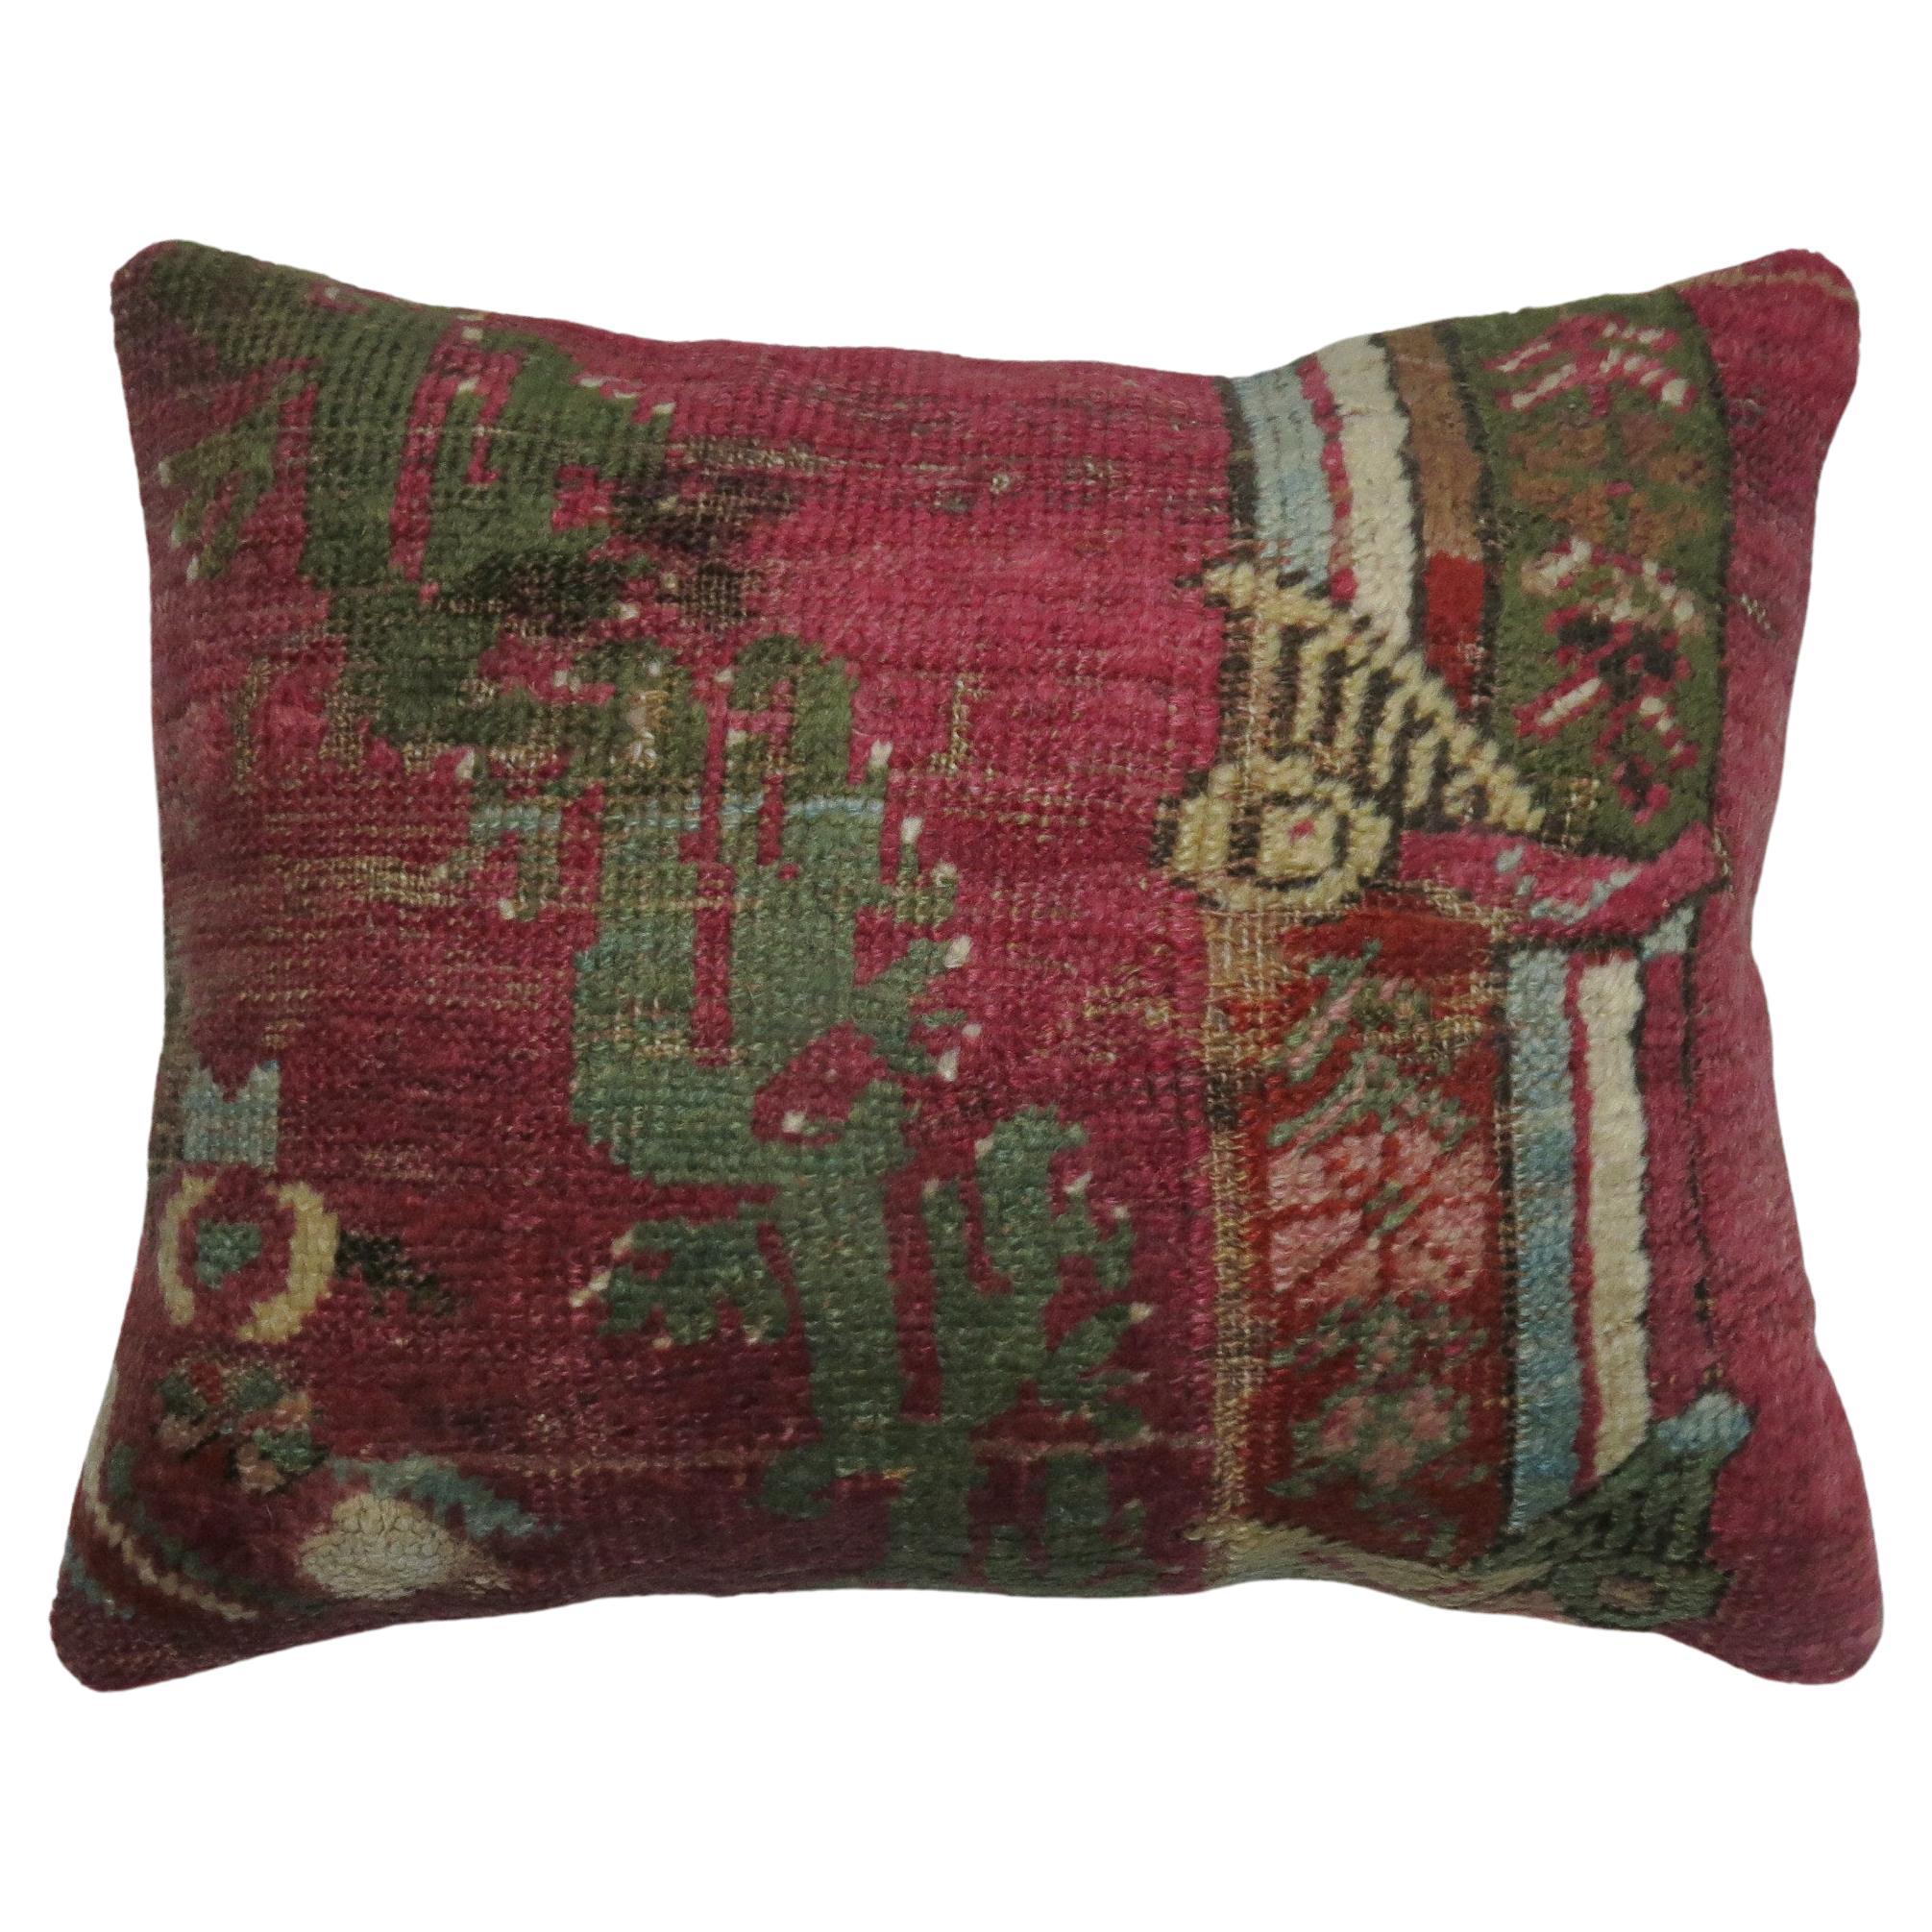 One of a kind rug pillow made from a  19th century turkish rug with cotton back and zipper closure.
14'' x 17''
    